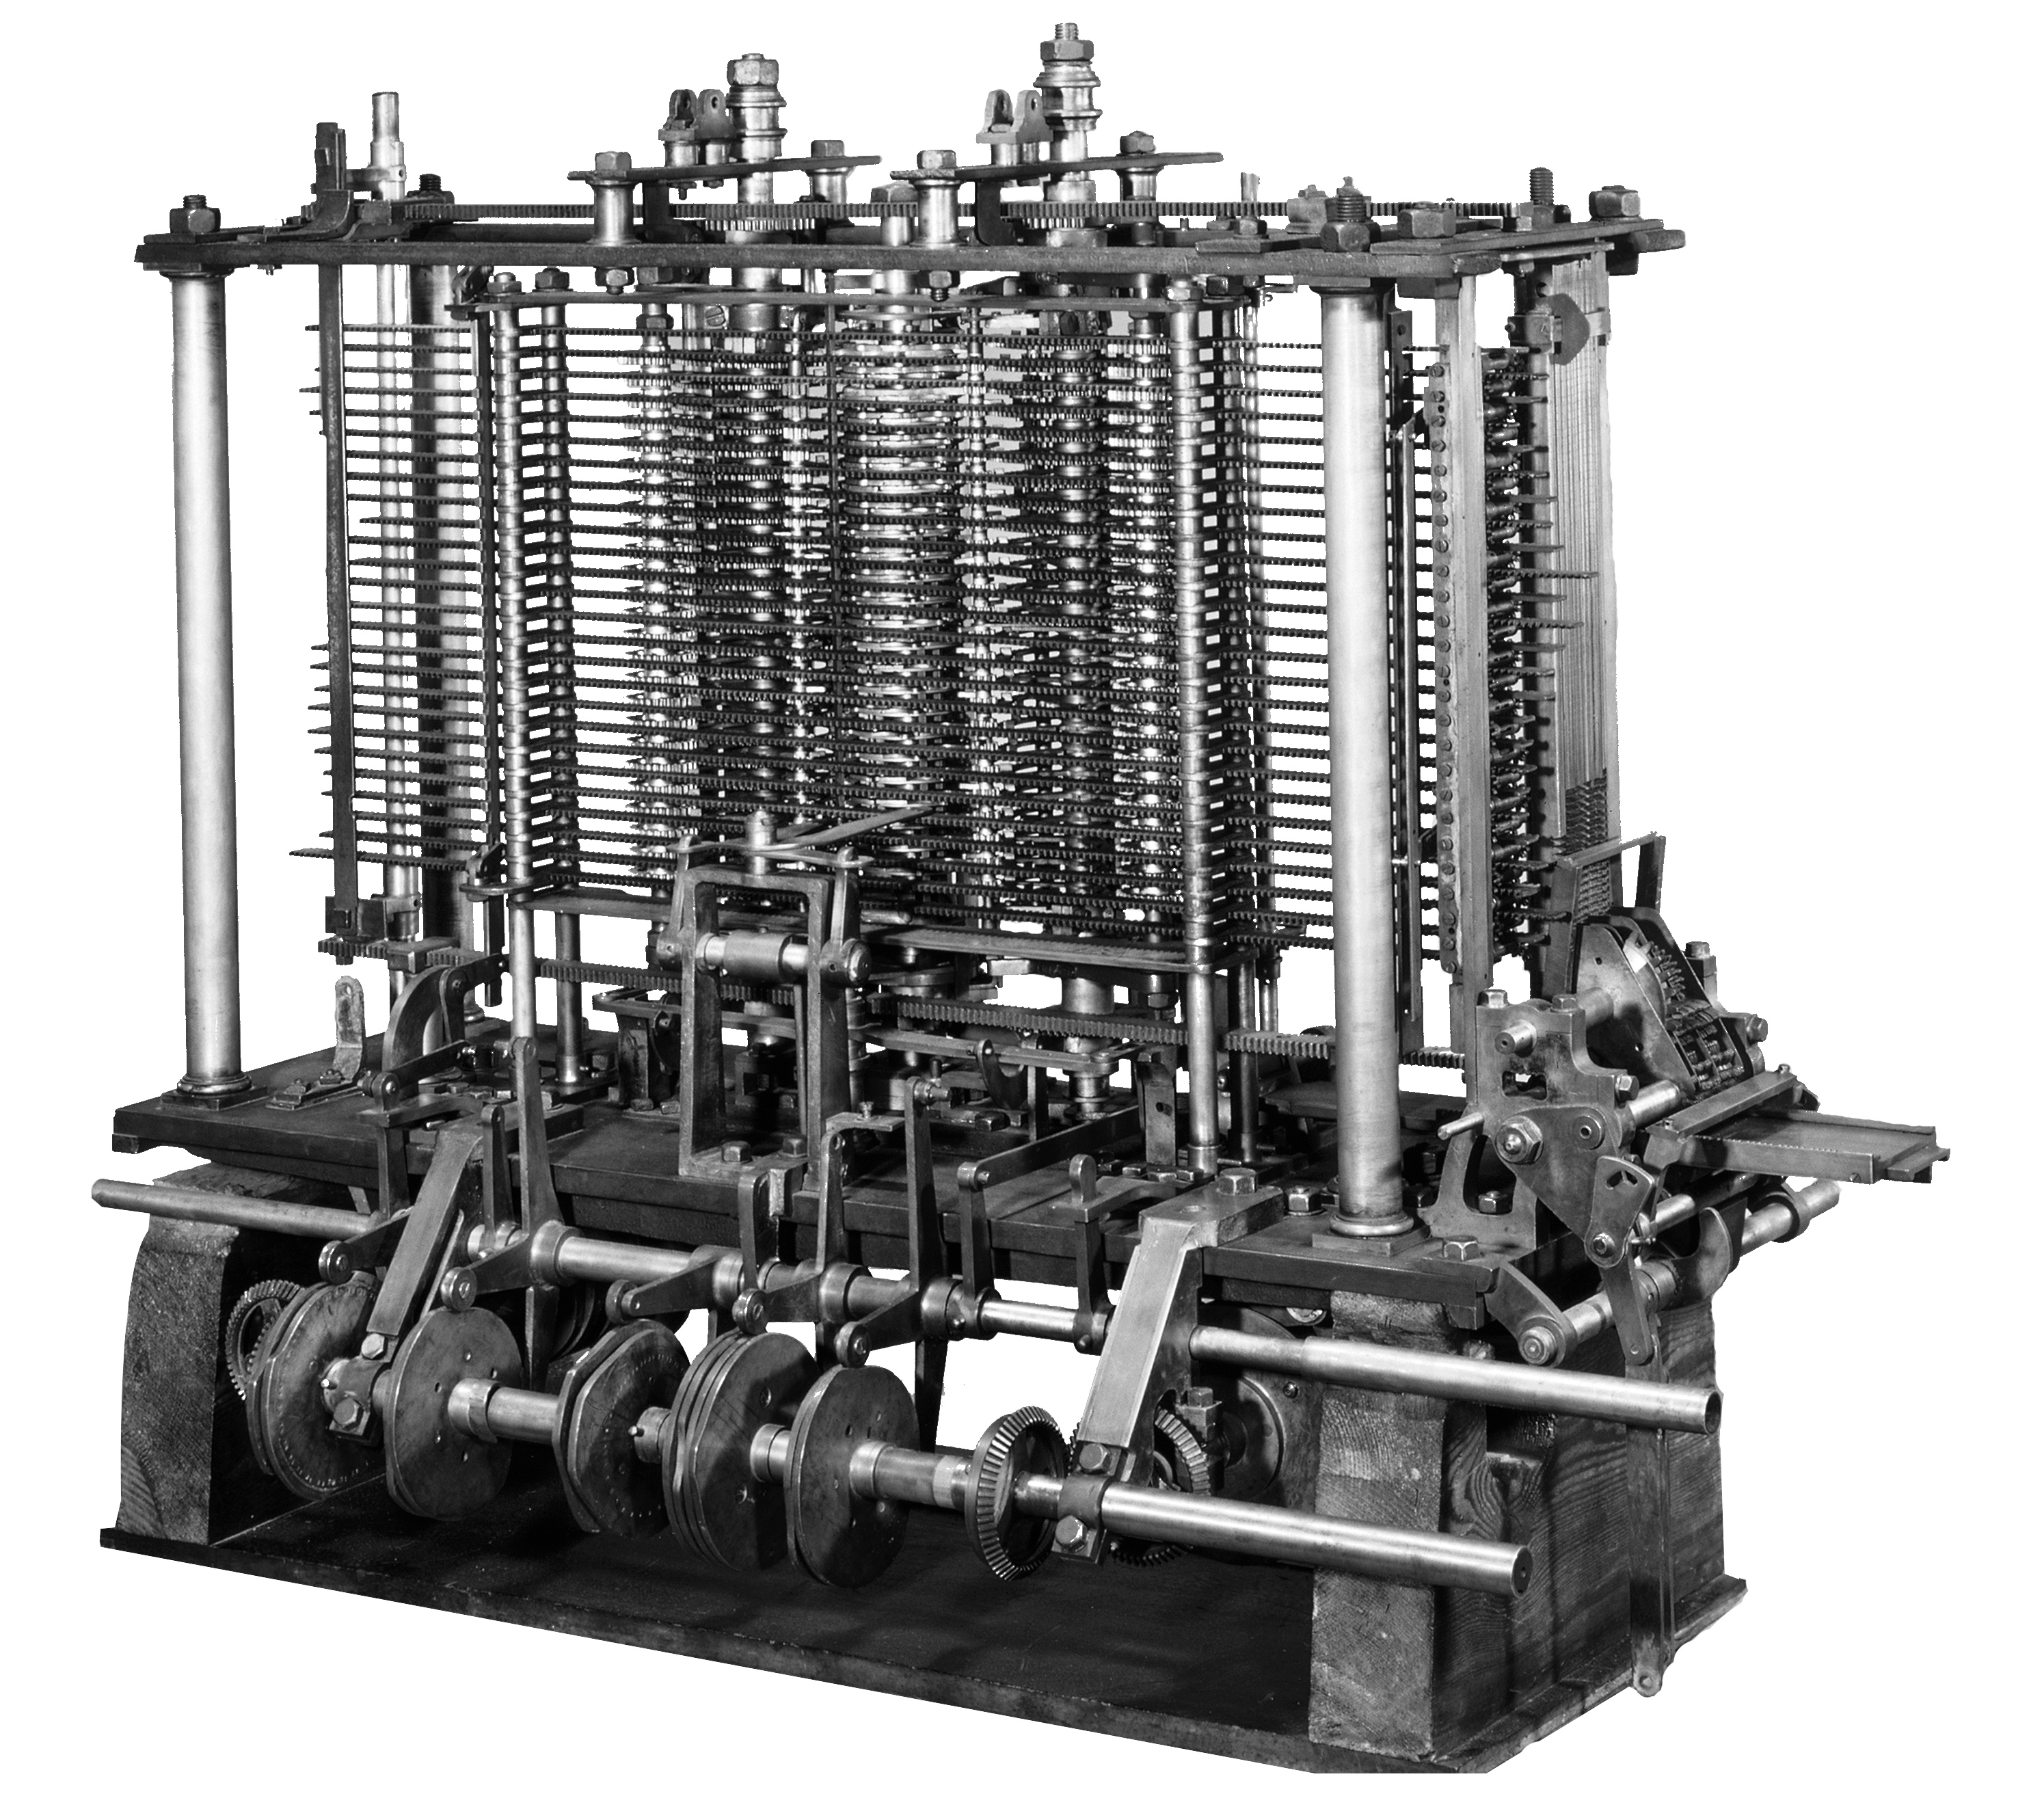 first computer invented